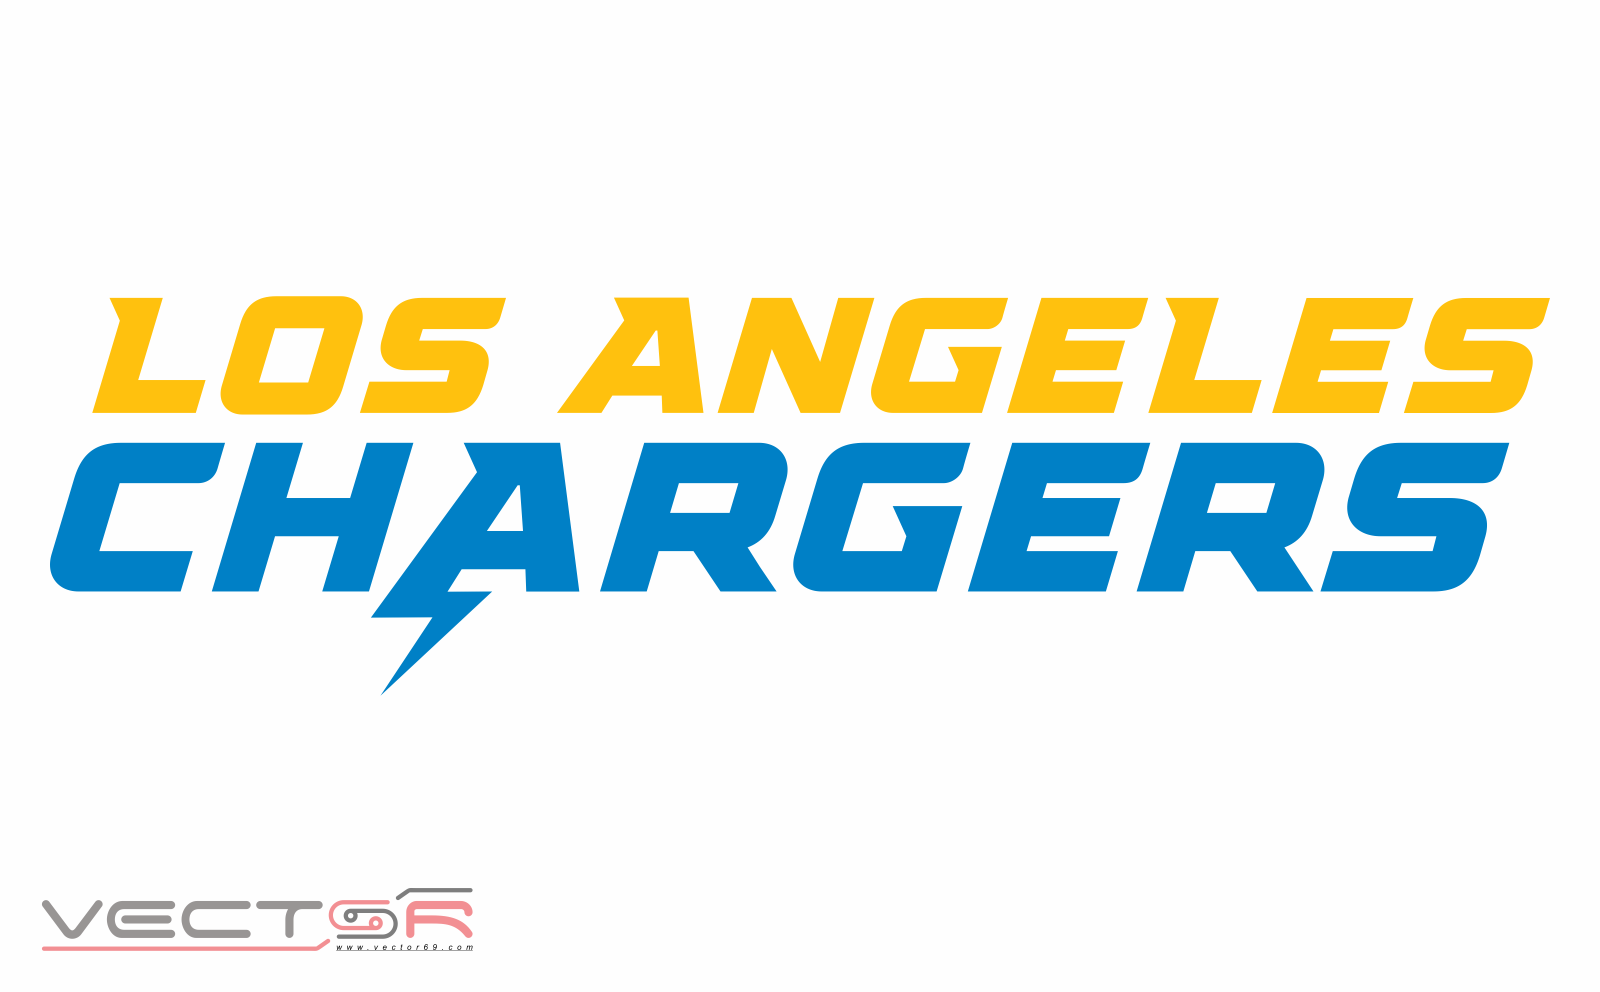 Los Angeles Chargers Wordmark - Download Transparent Images, Portable Network Graphics (.PNG)